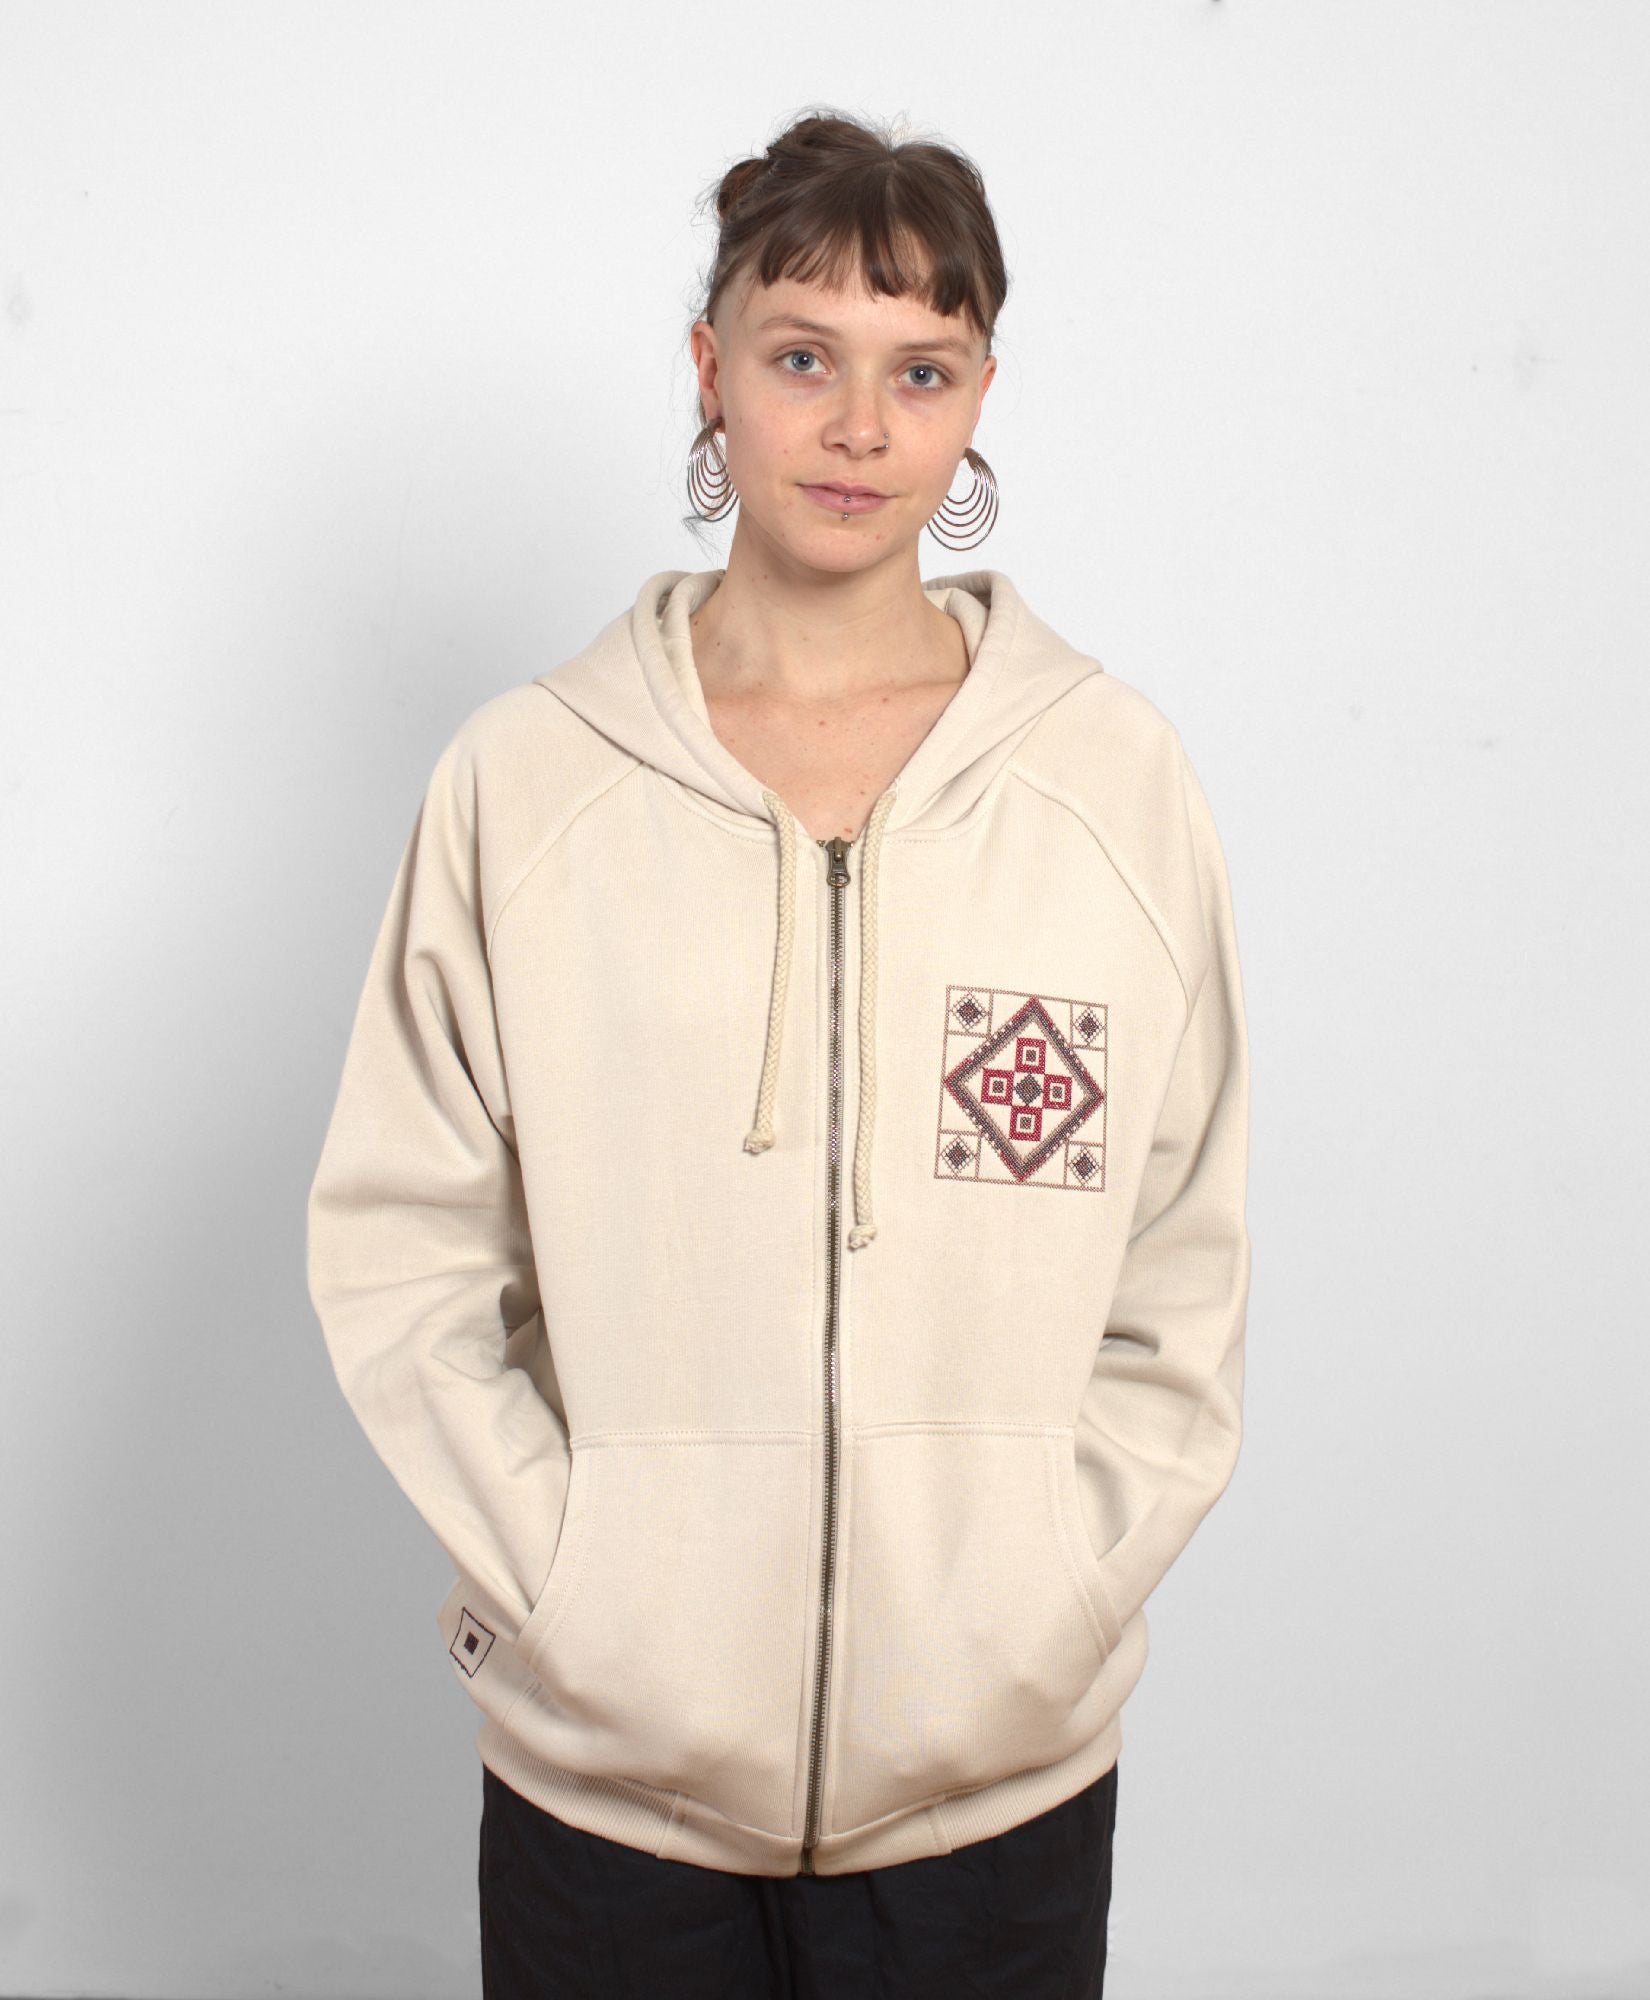 Embroidered art on Cotton Zip Hoodie / Stitched Beige Hooded Jacket